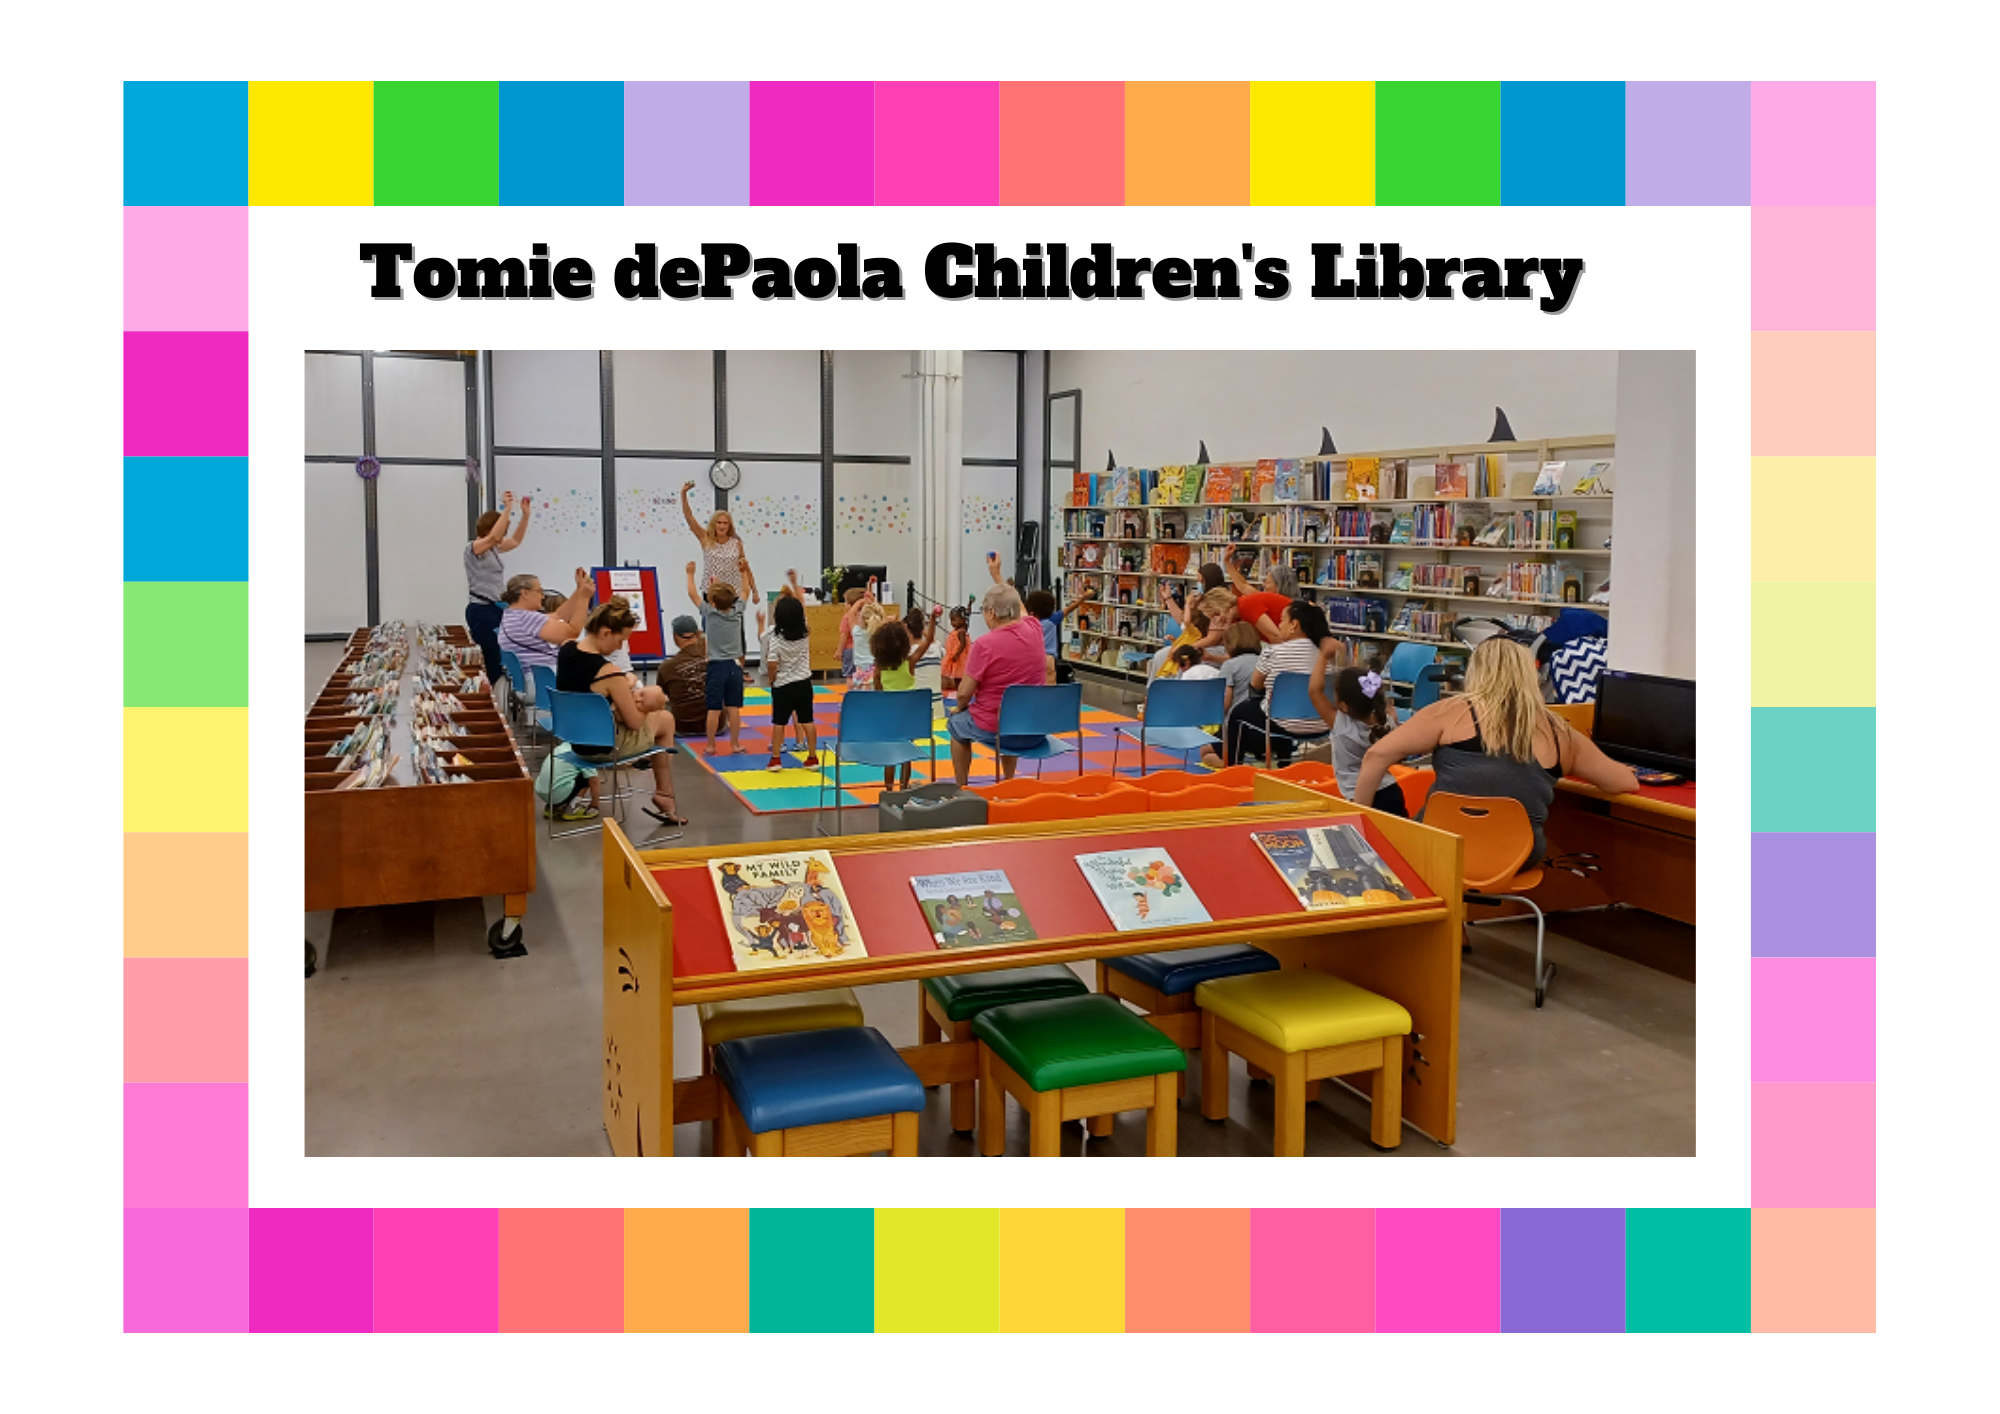 Tomie dePaola Children's Library image showing the children's section full of kids and parents